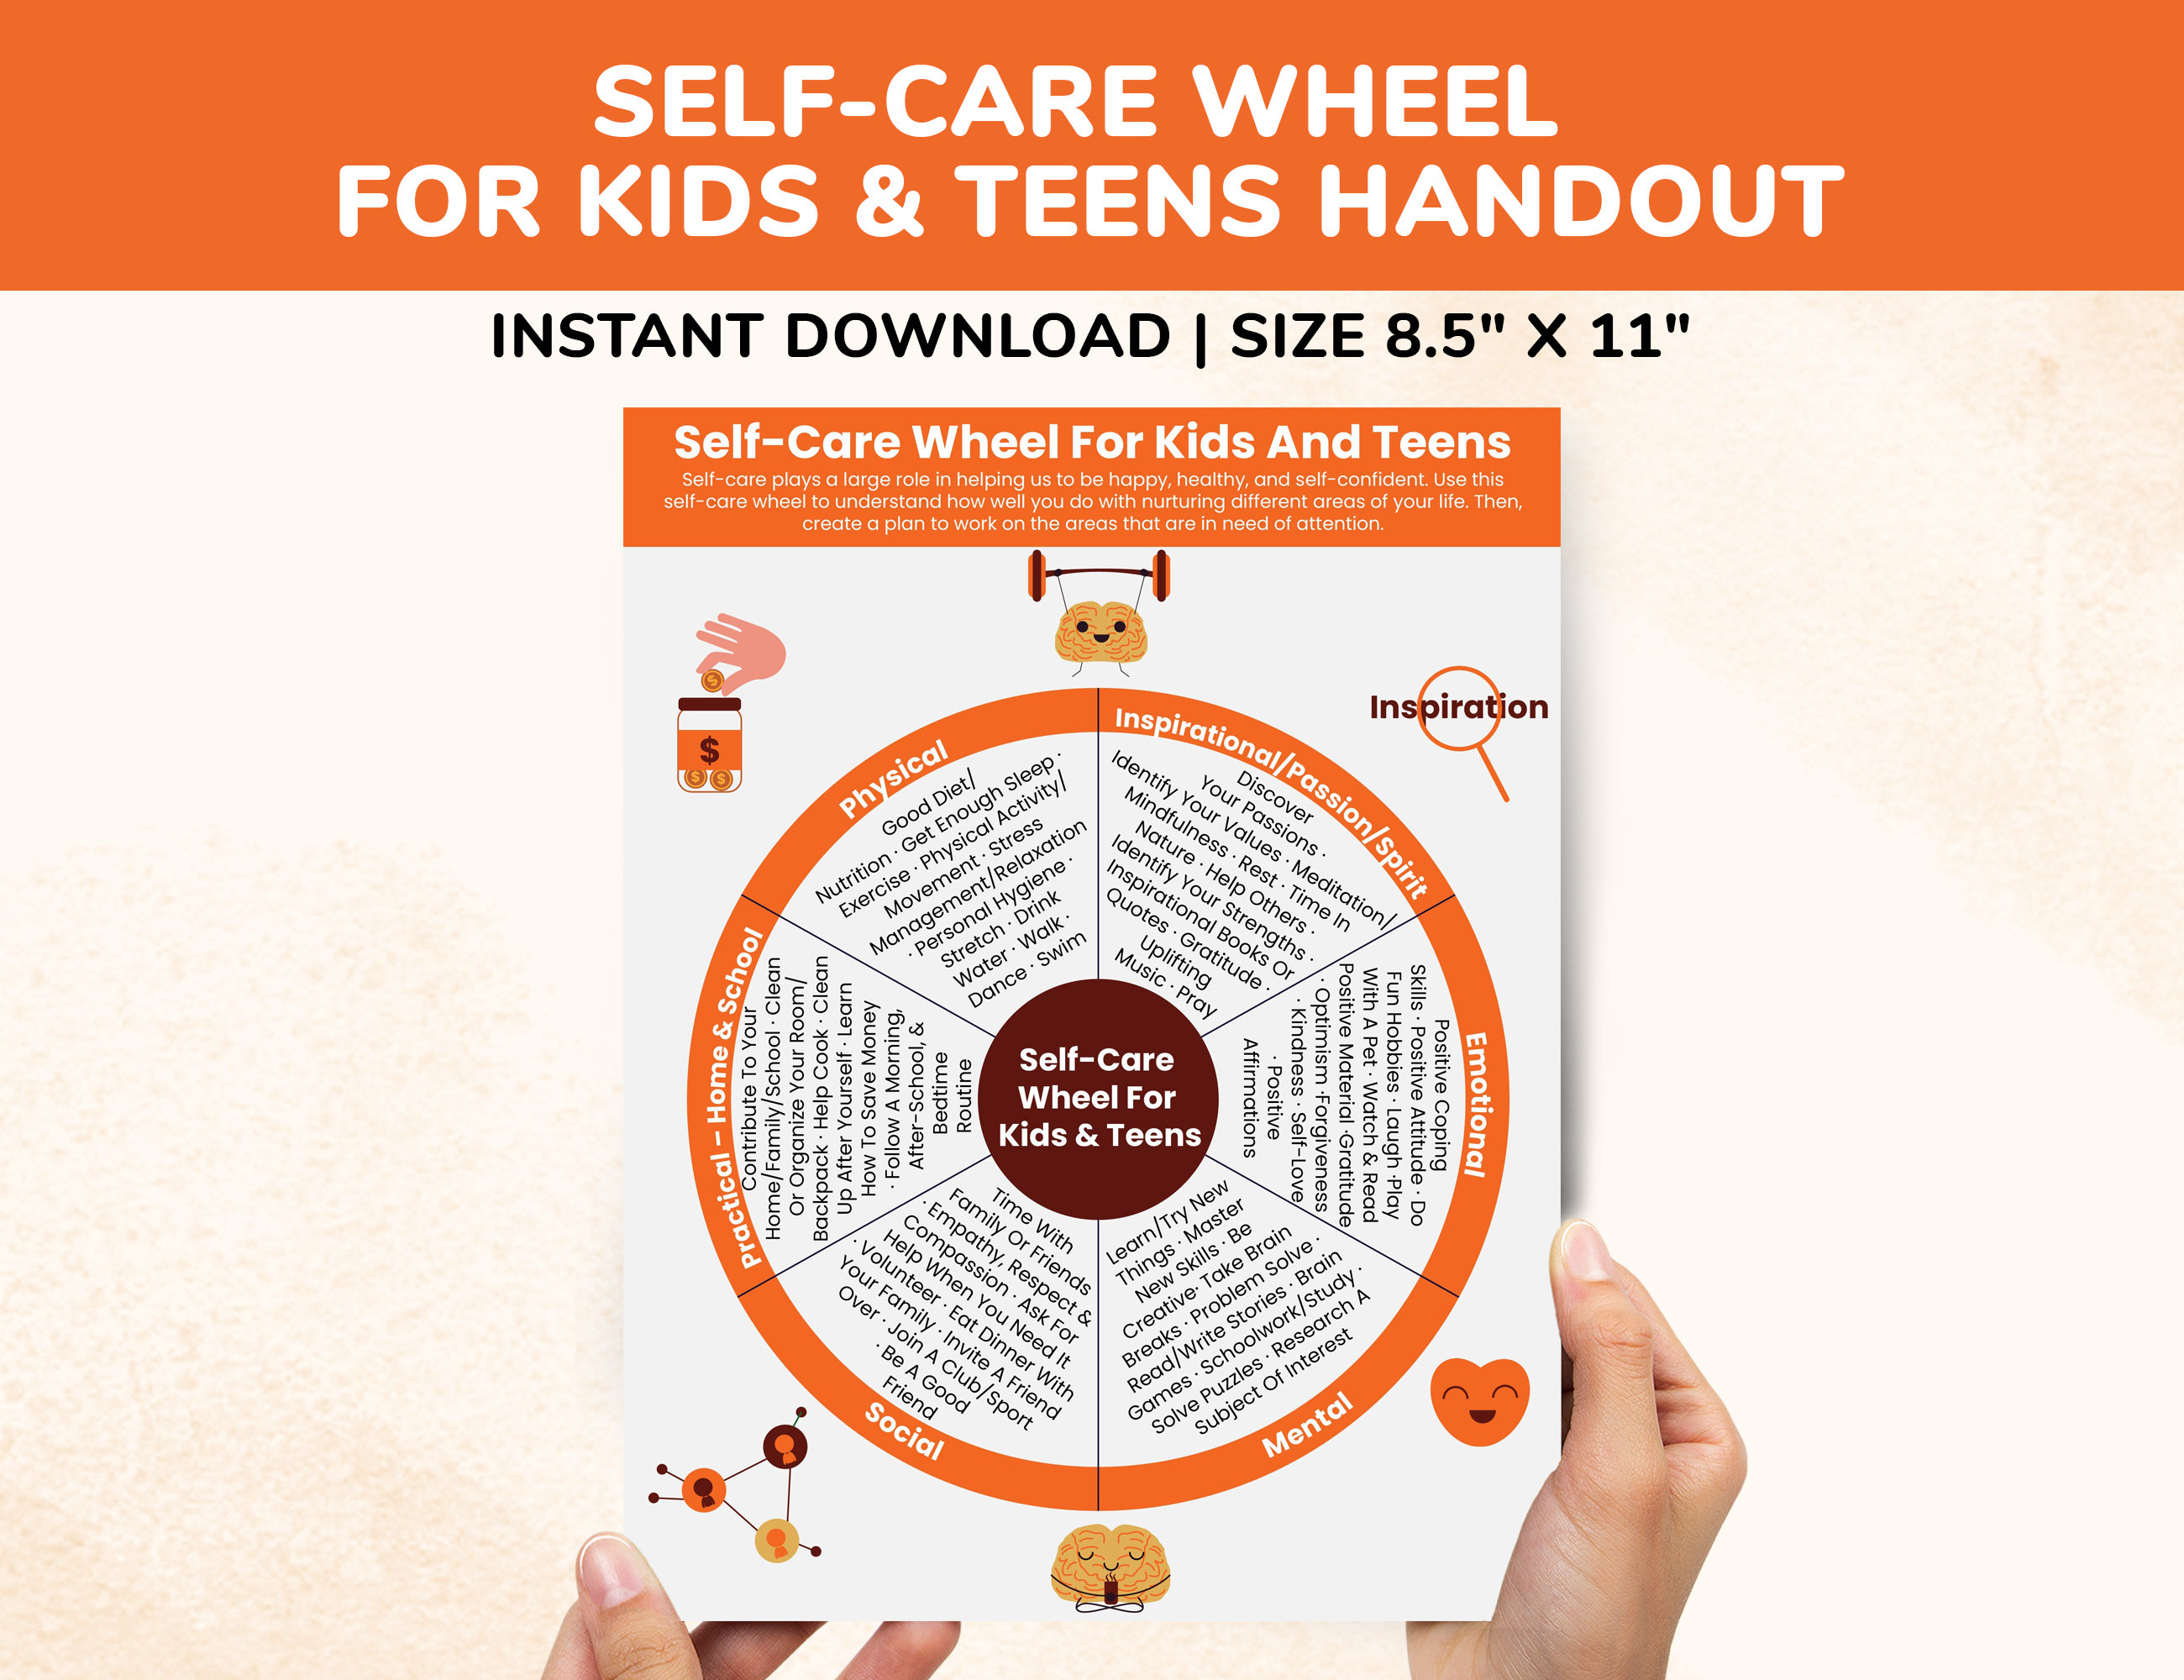 The Self-Care Kit for Stressed Out Teens – Wild Soul River, LLC